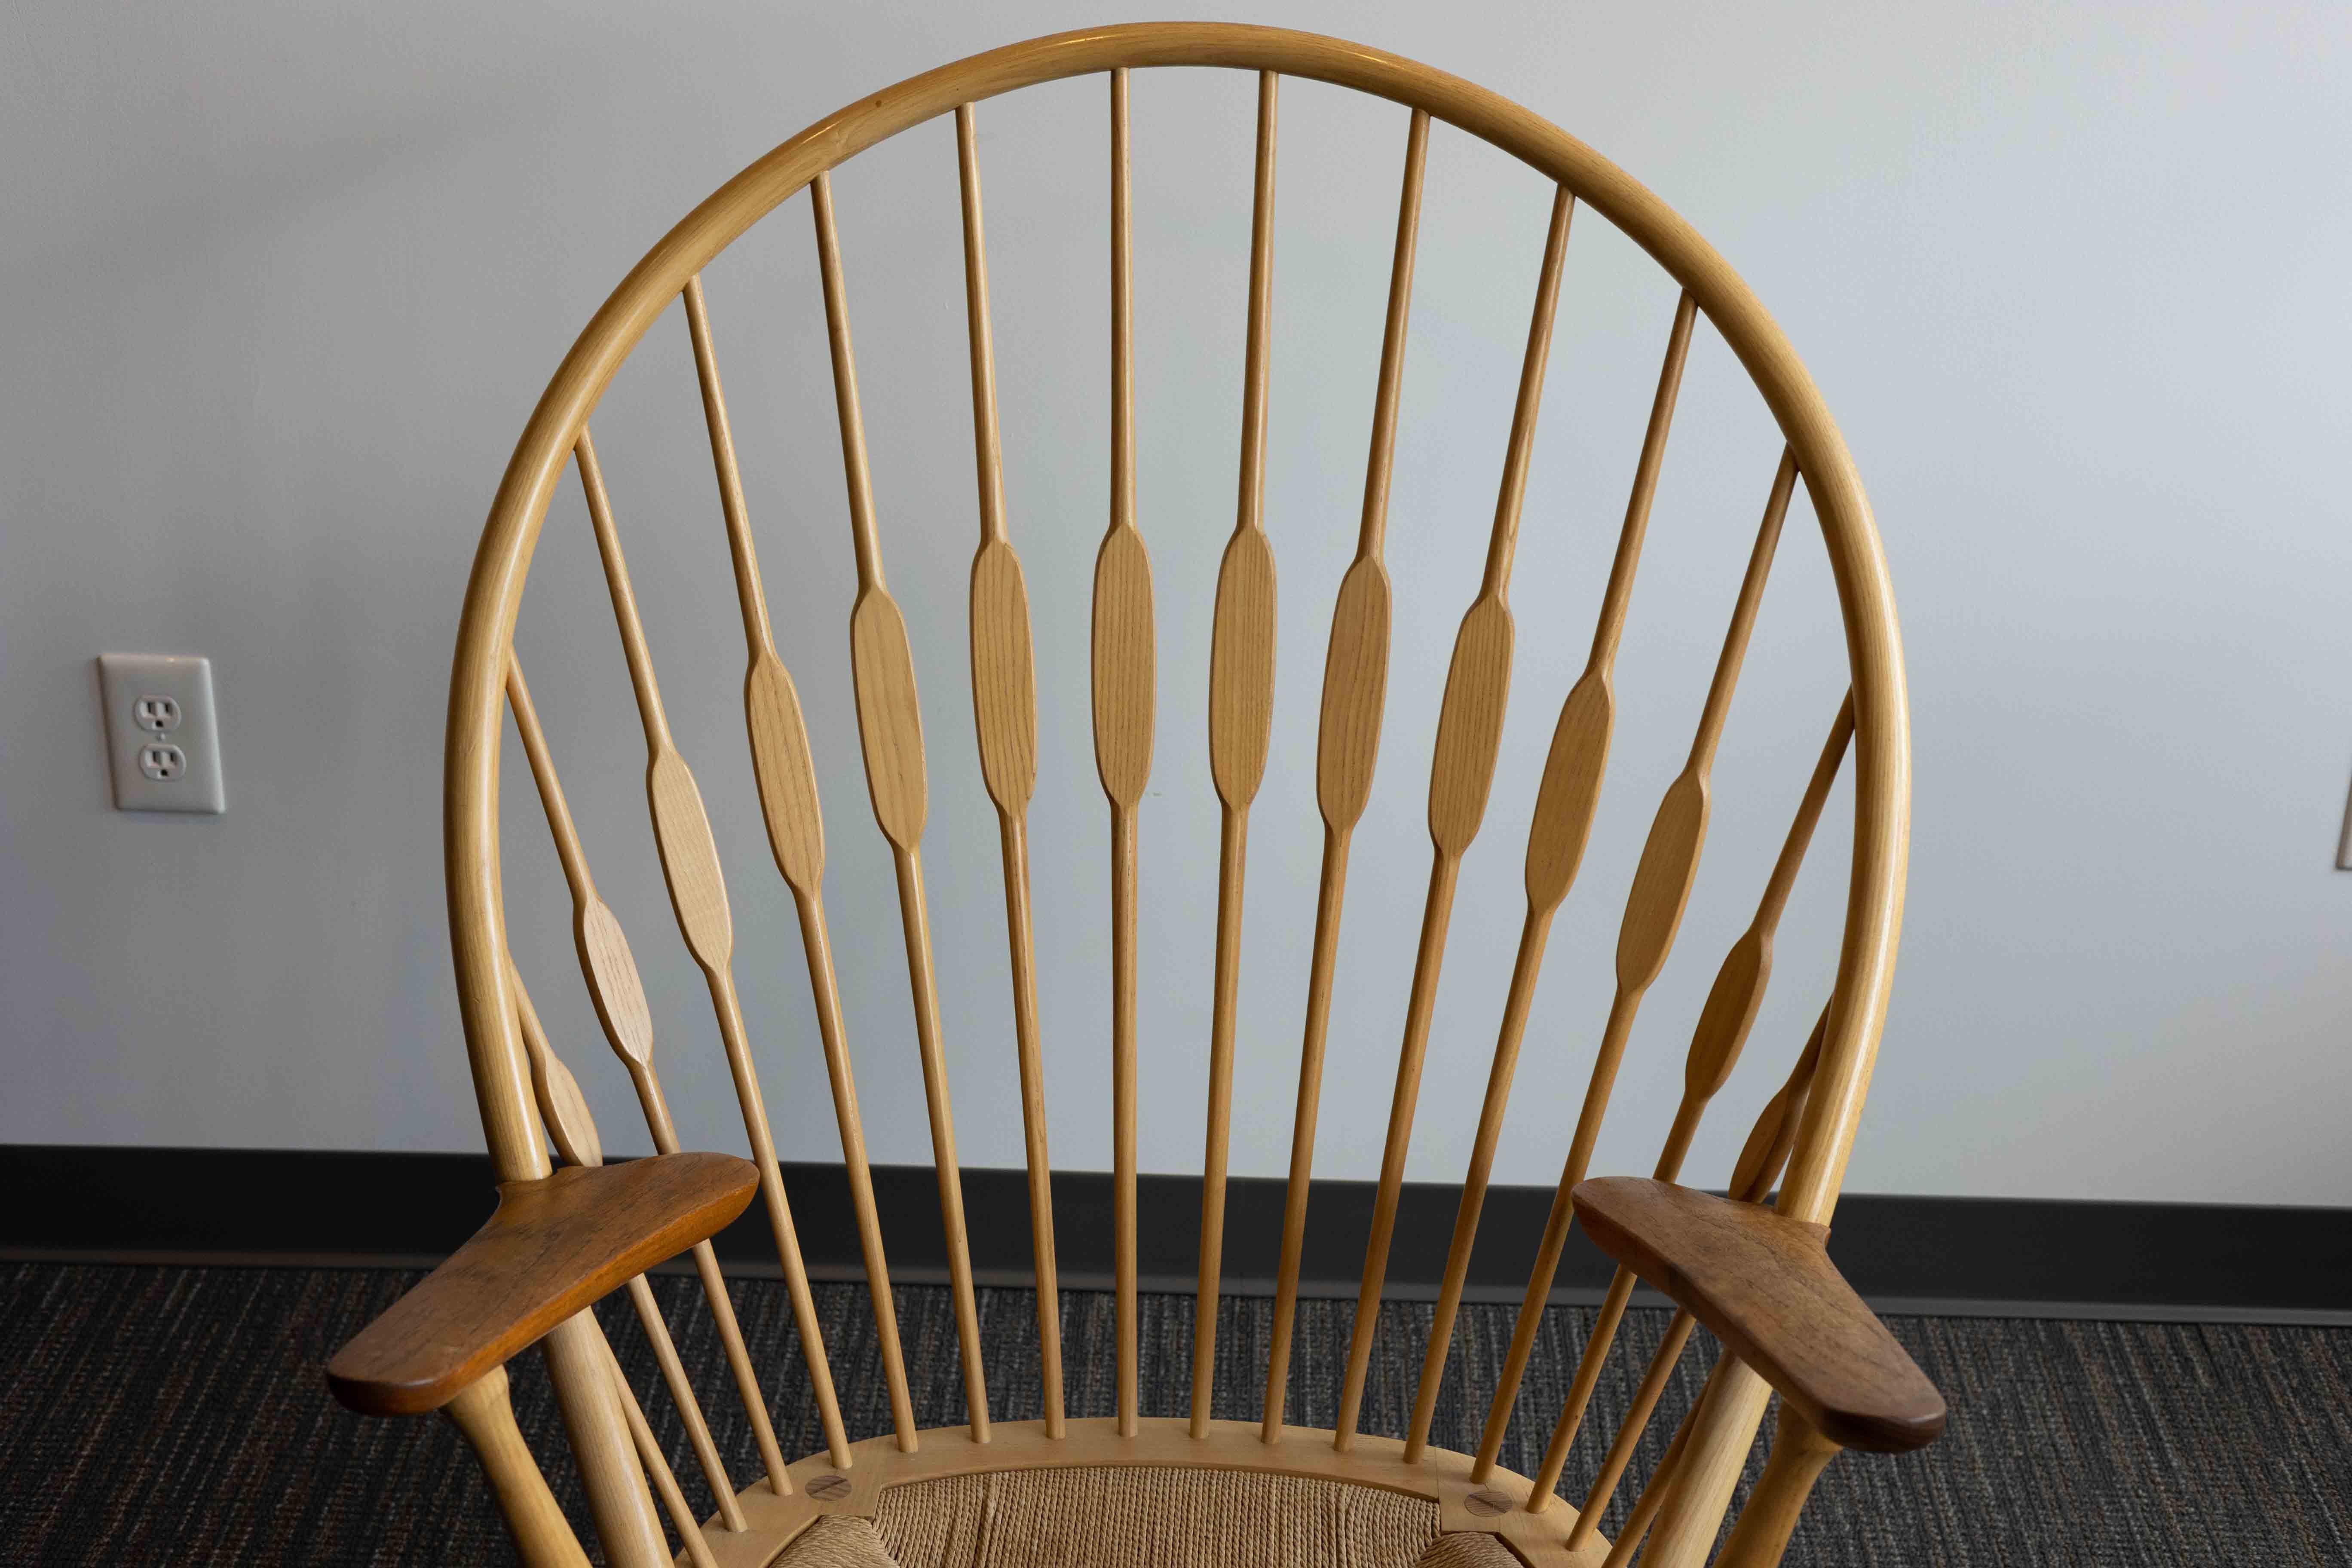 A mid-century modern PP550 ‘Peacock’ chair designed by Hans Wegner in 1947 for Johannes Hansen.

Modeled after a traditional American Windsor chair, Hans Wegner’s Peacock chair strips the form to reveal its construction while retaining aesthetic,